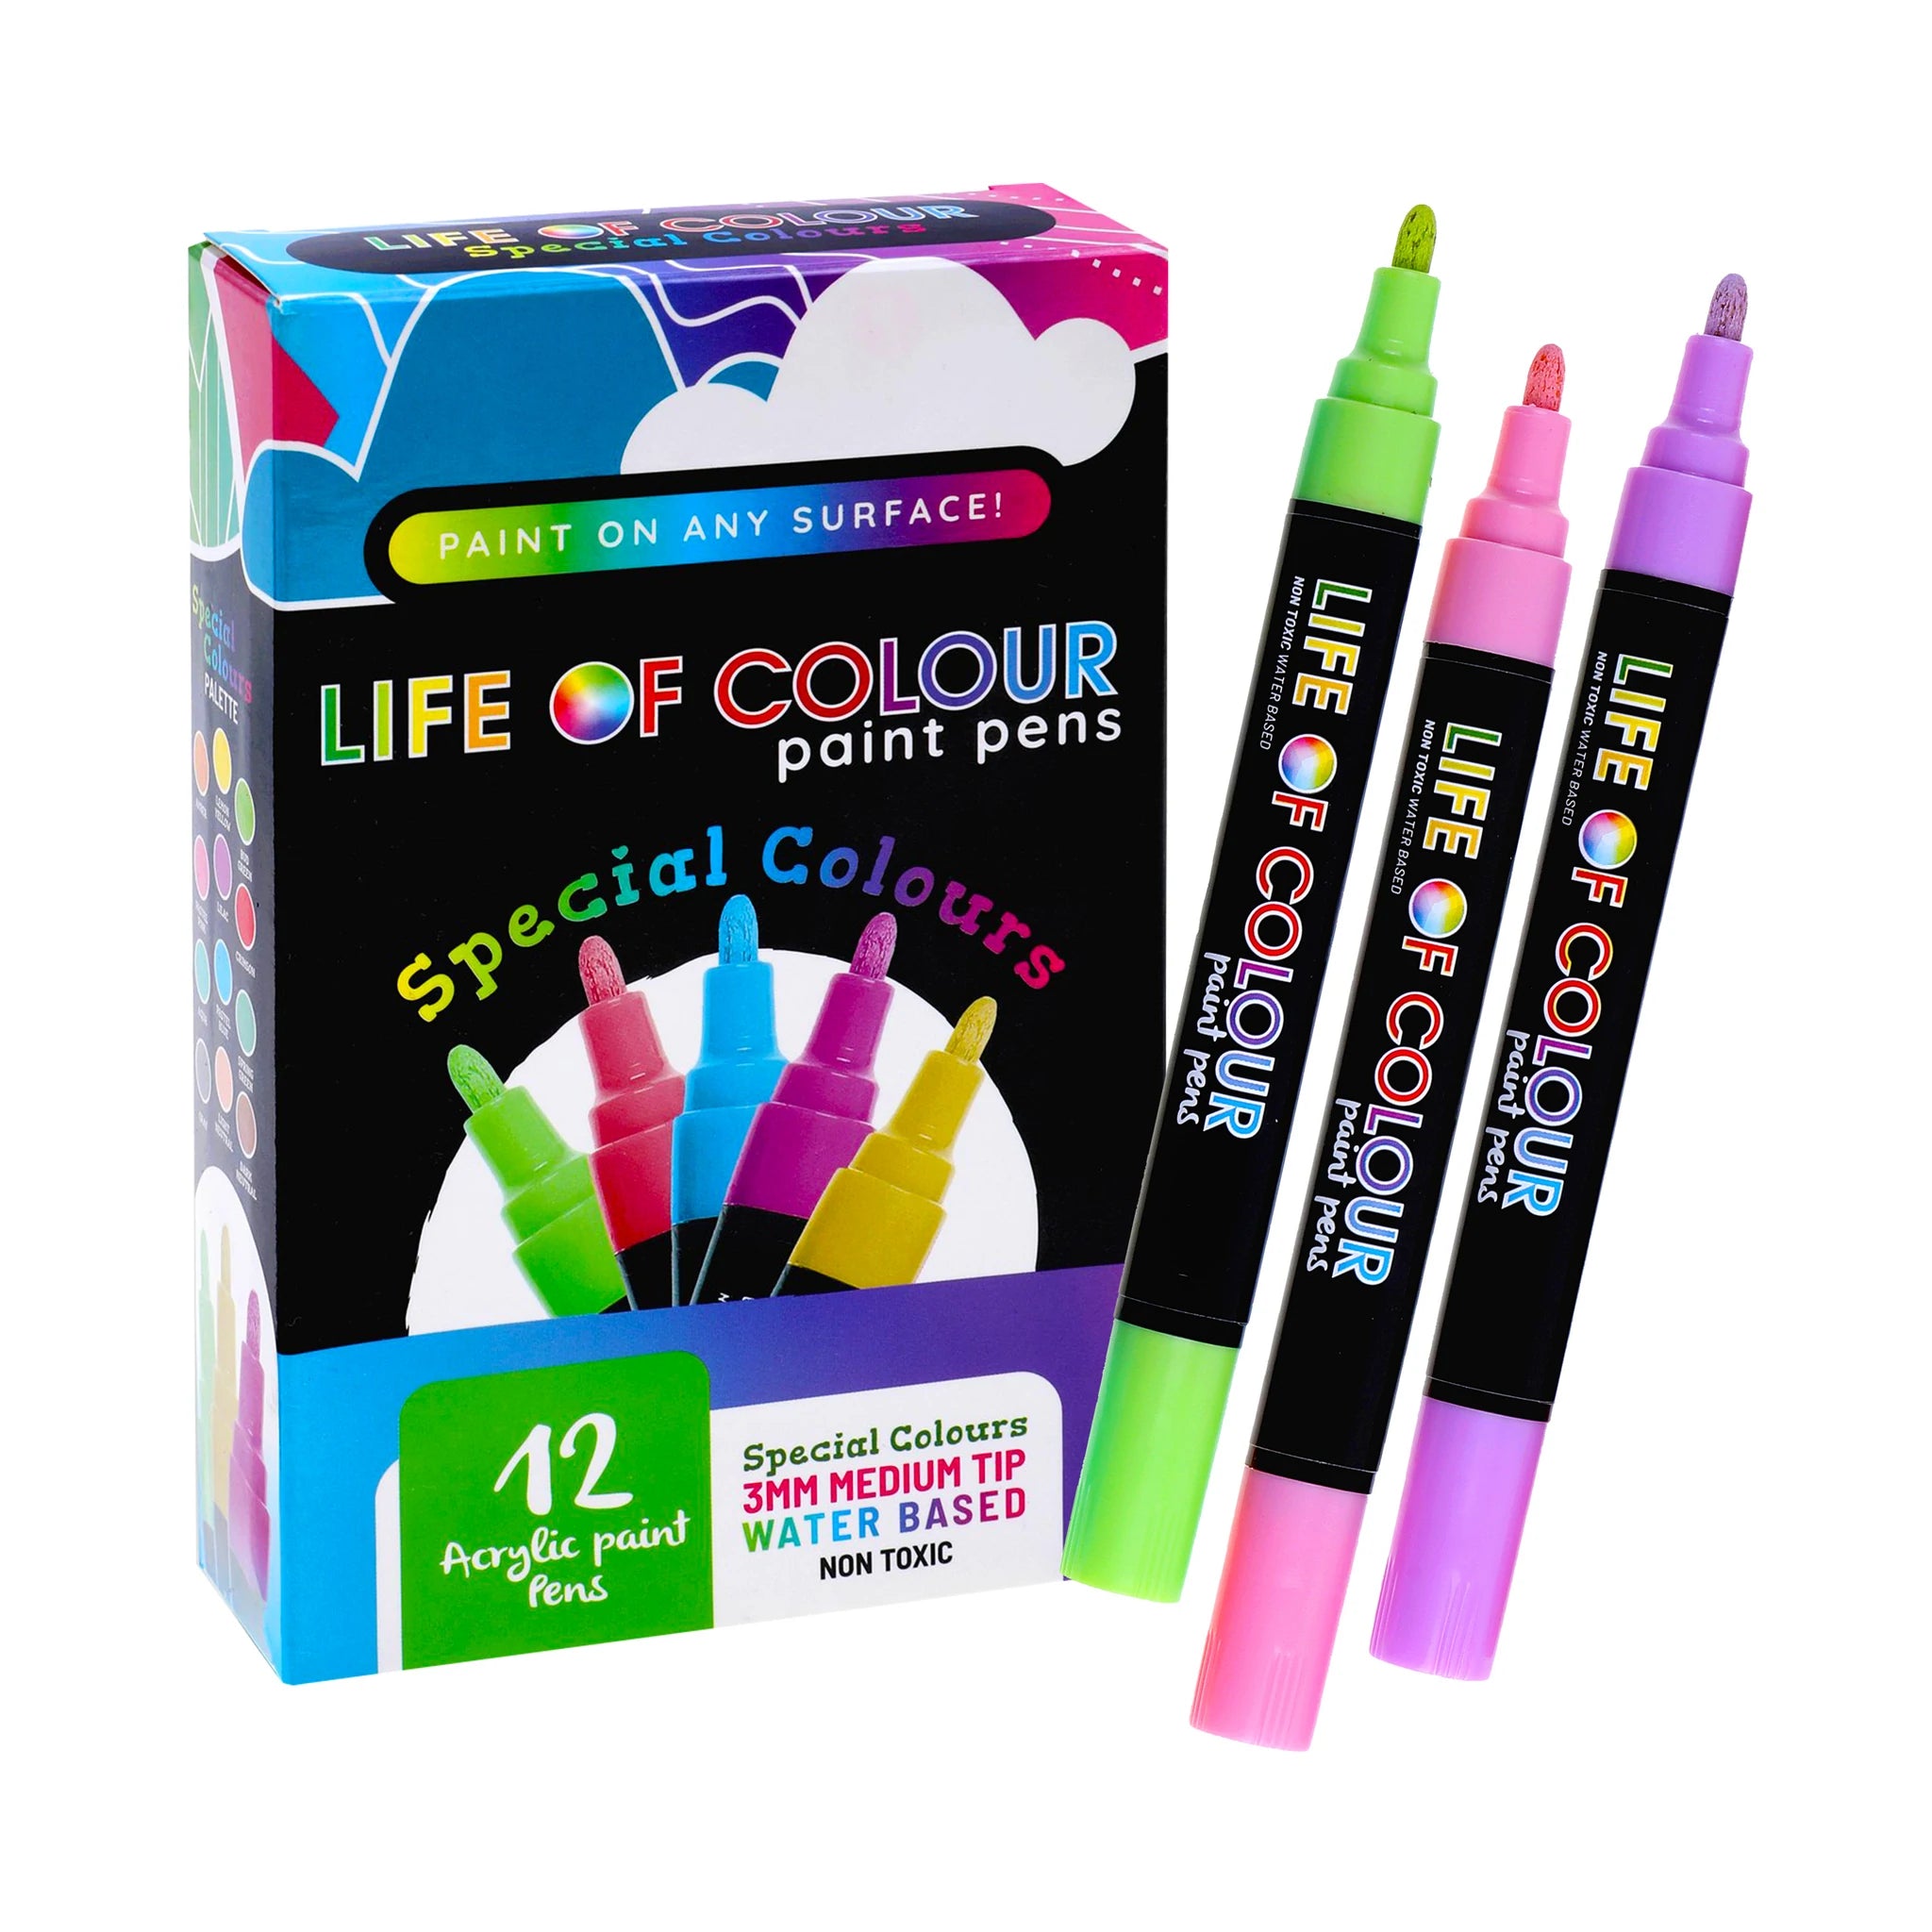 Life of Colours Special Colours 3mm Medium Tip Acrylic Paint Pens - Set of 12